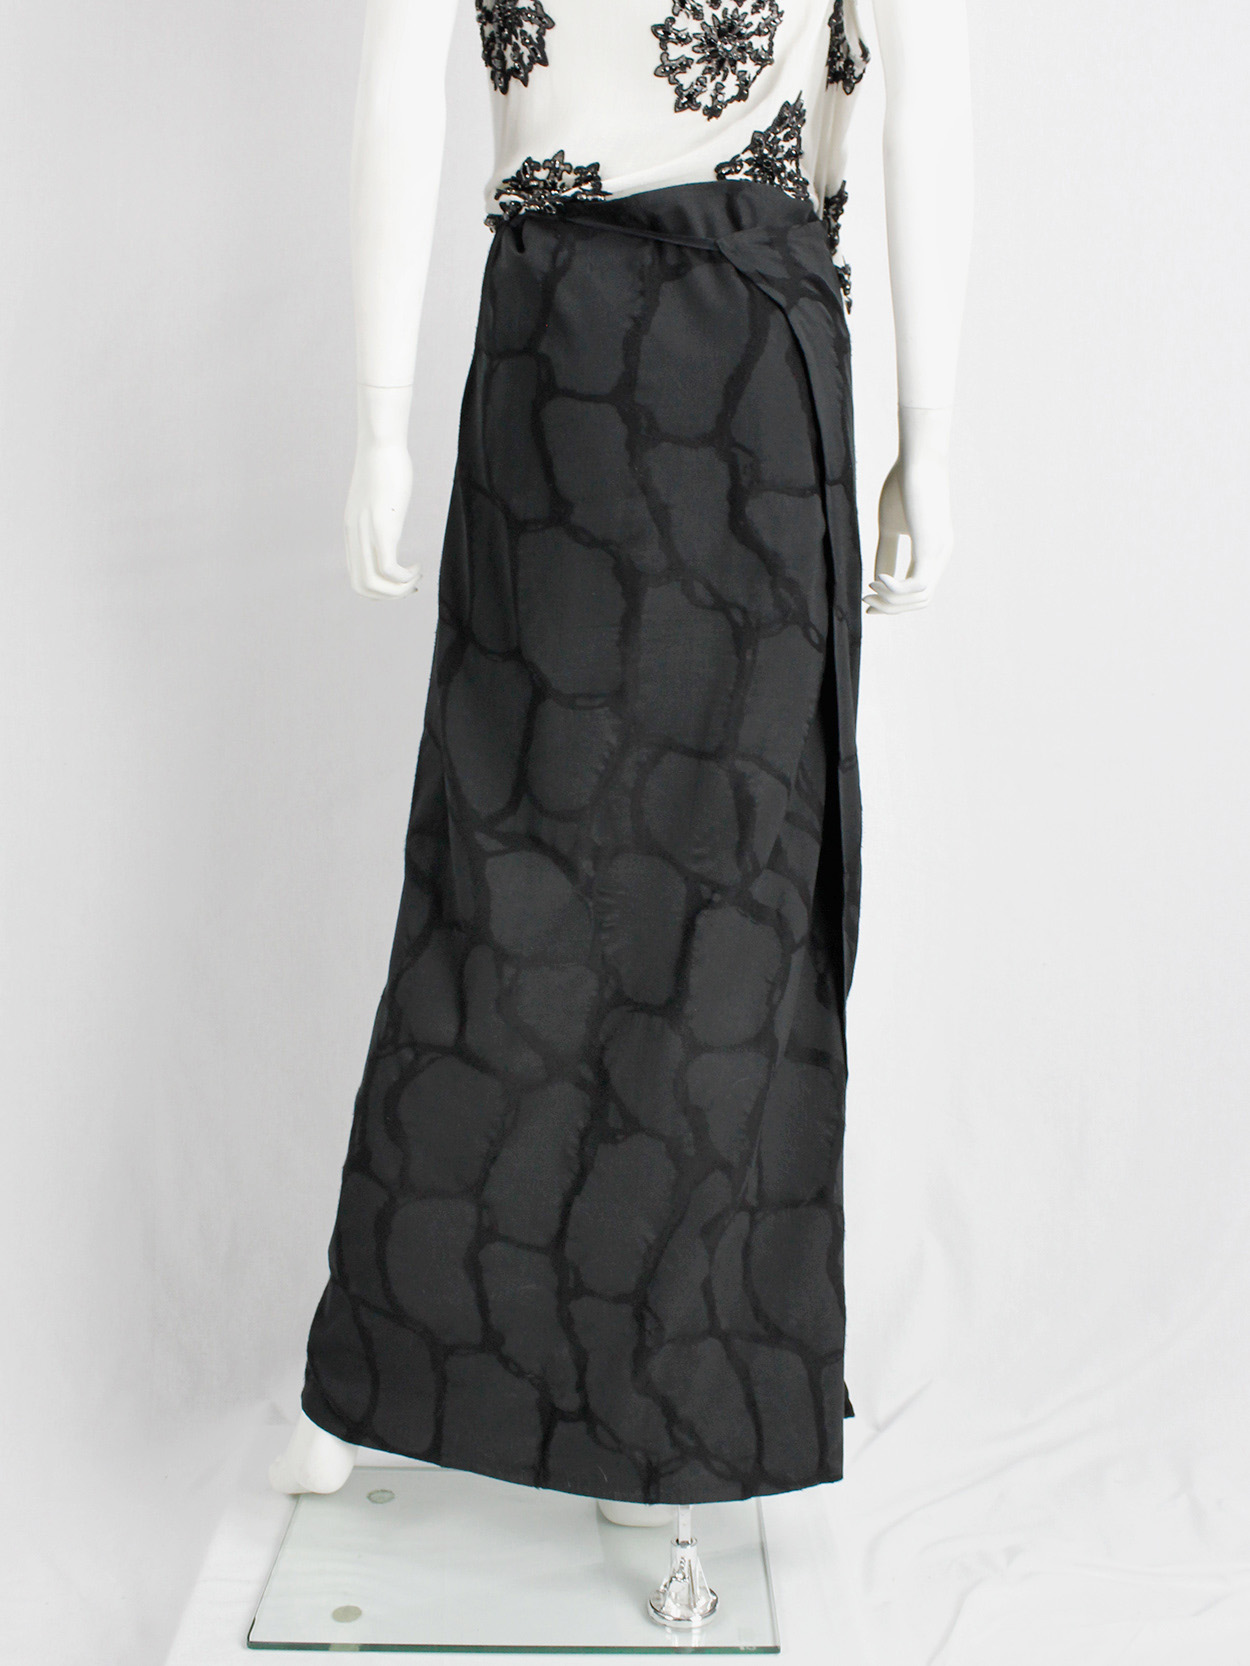 Ann Demeulemeester black wrap maxi dress with netting pattern spring 2001 (10)